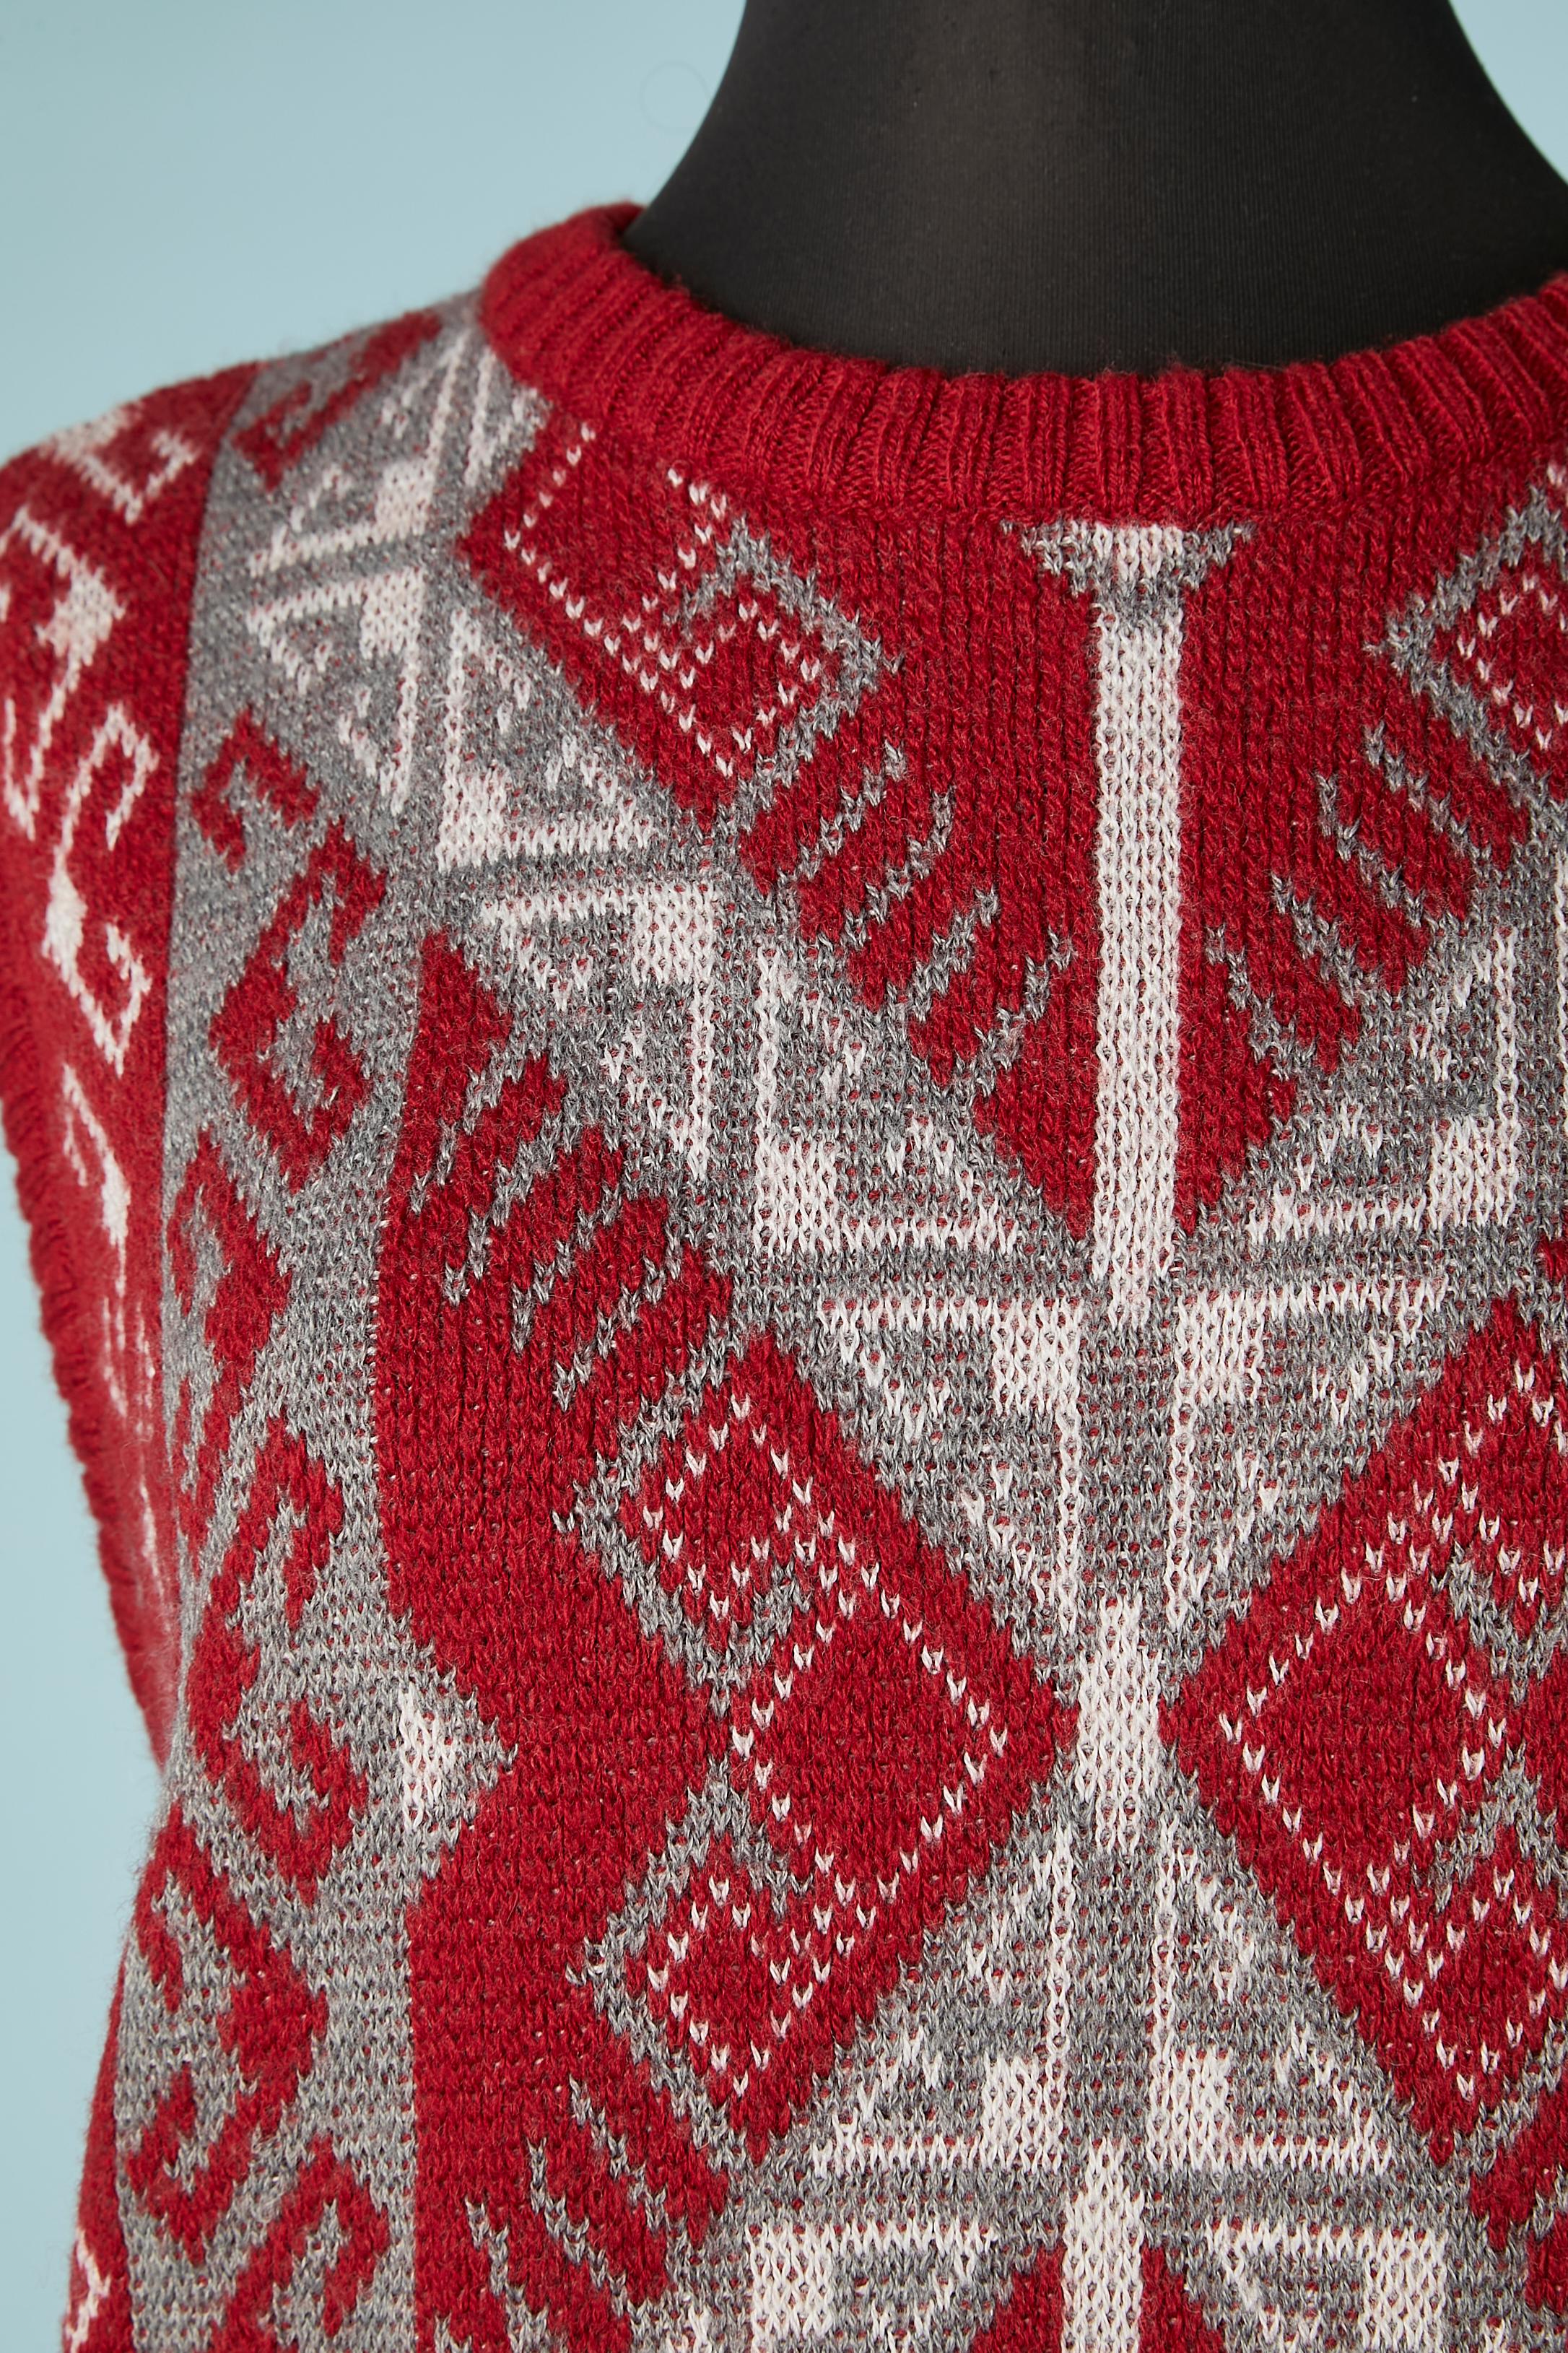 Sleeveless jacquard sweaters with graffic pattern. No fabric composition tag but probably wool. 
SIZE 56/58 XL 